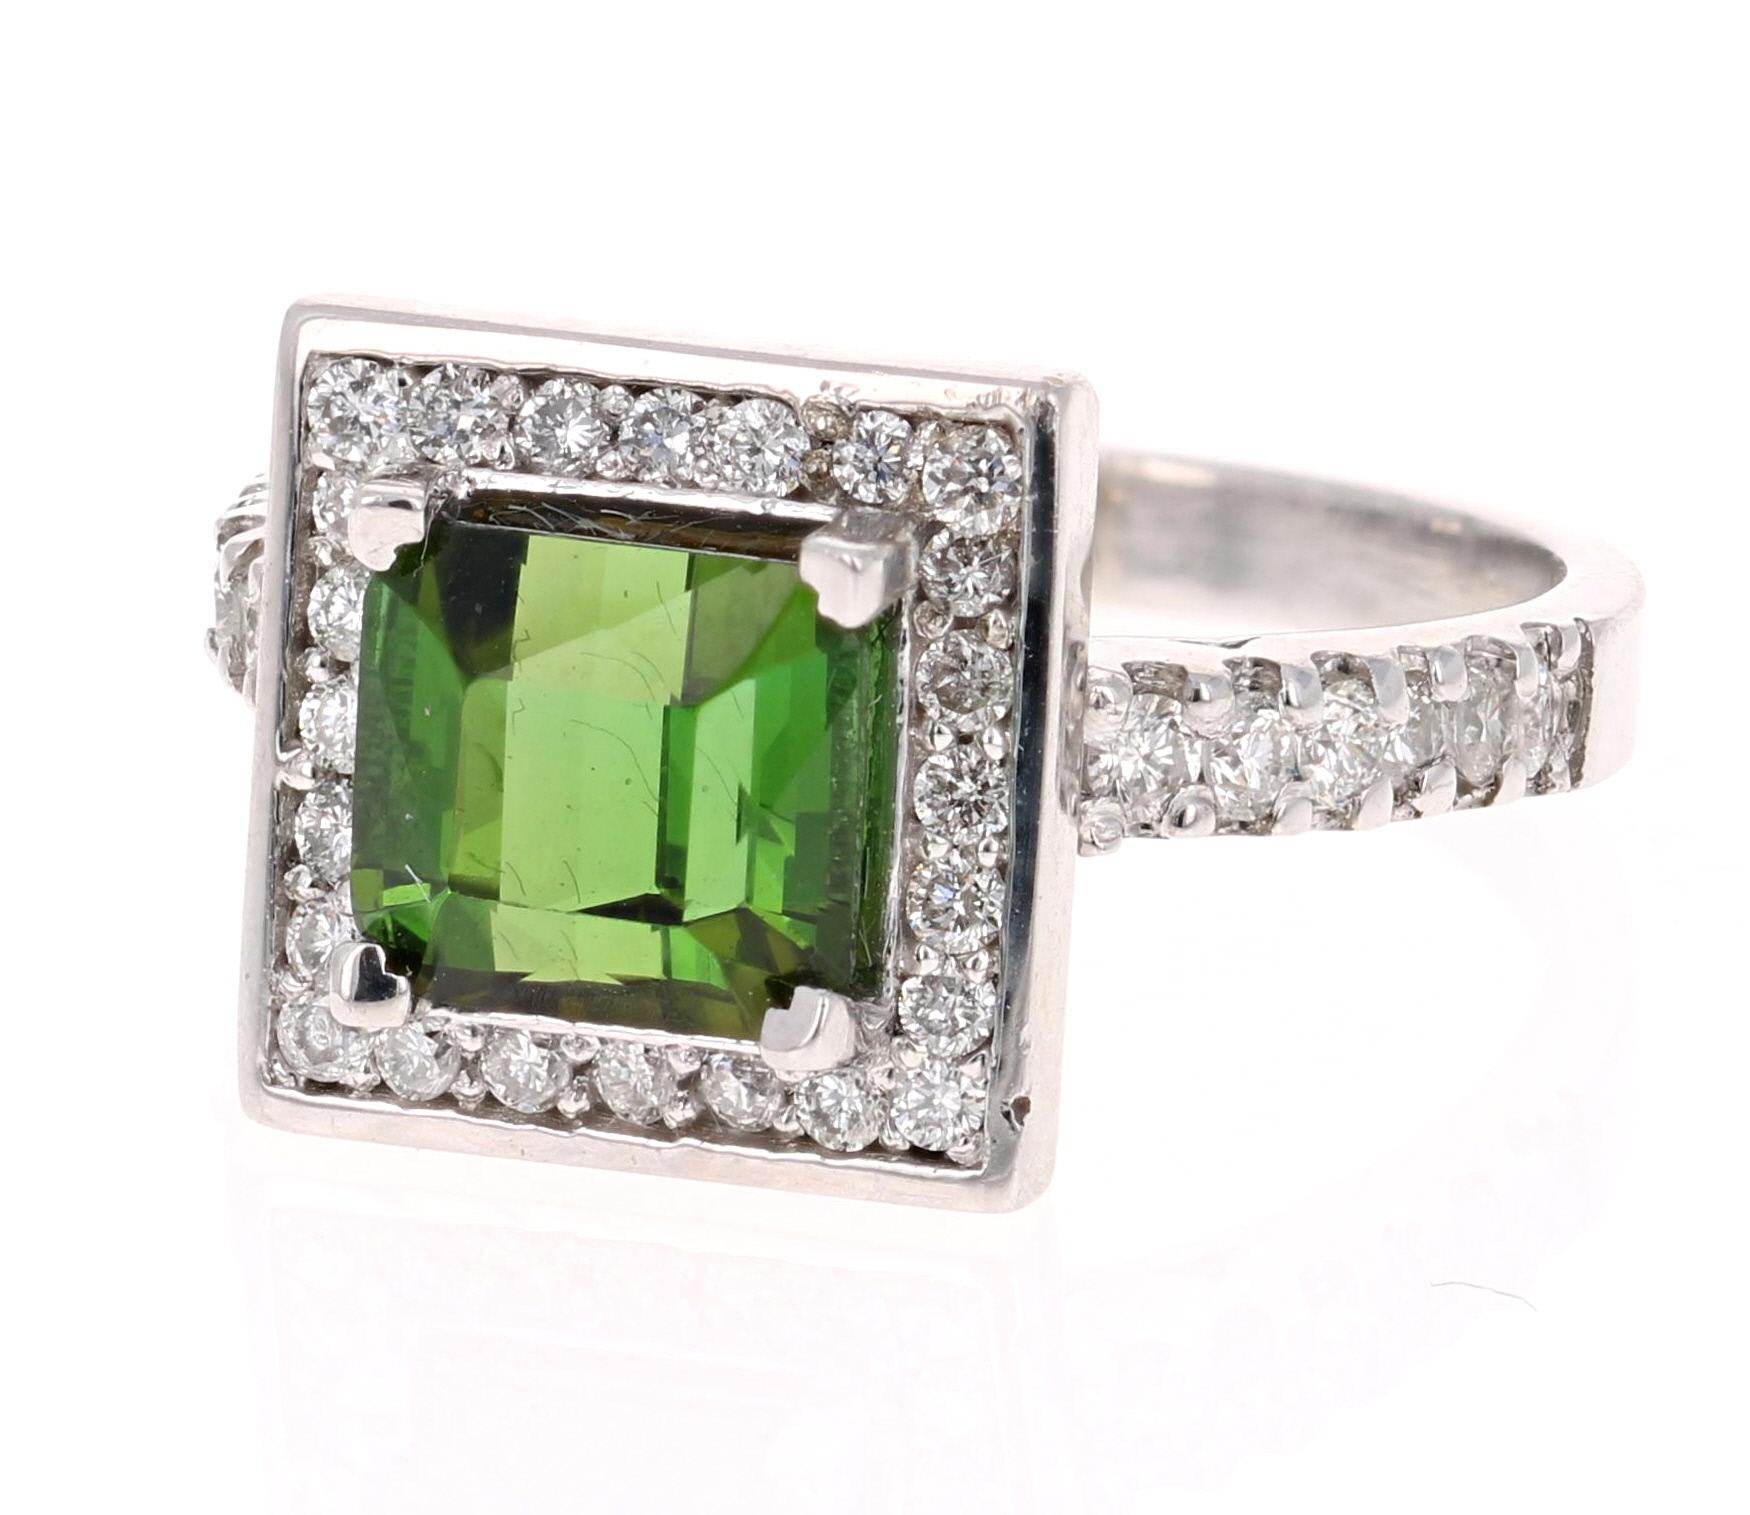 Contemporary 2.93 Carat Green Tourmaline Diamond White Gold Ring For Sale